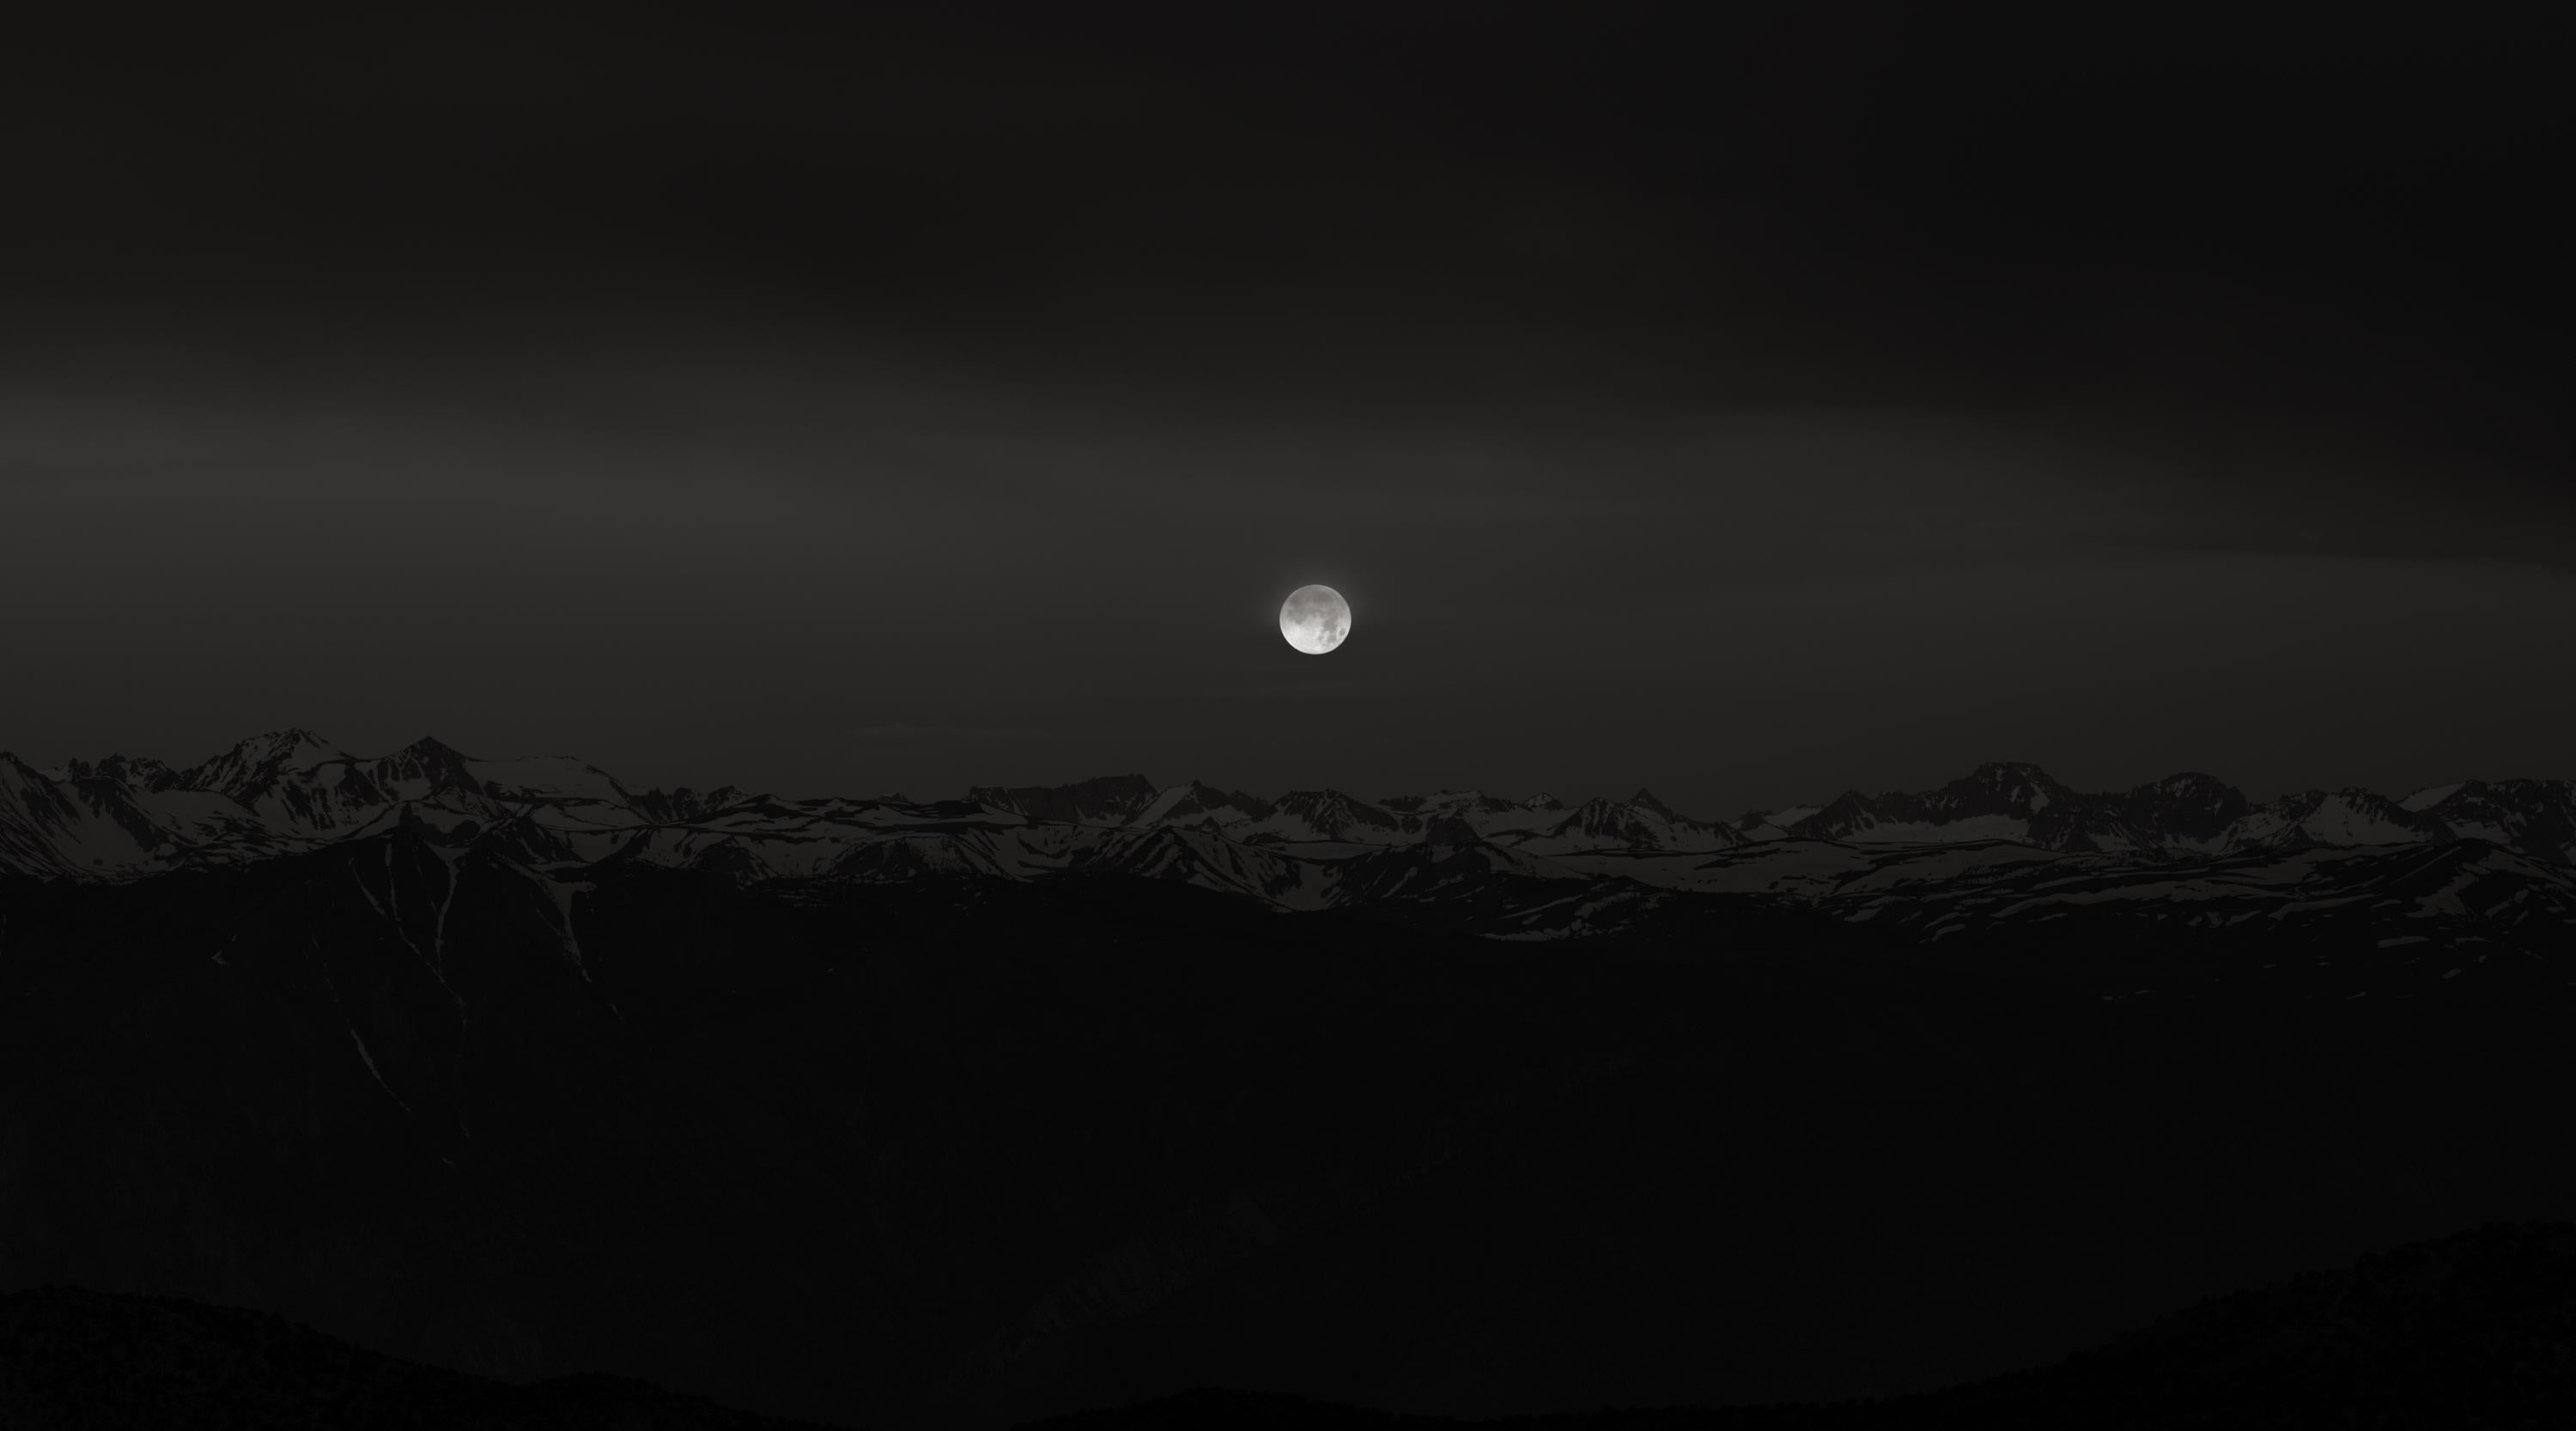 Jeffrey Conley Black and White Photograph - Sierra Crest and Moon, from White Mountains, CA 2019